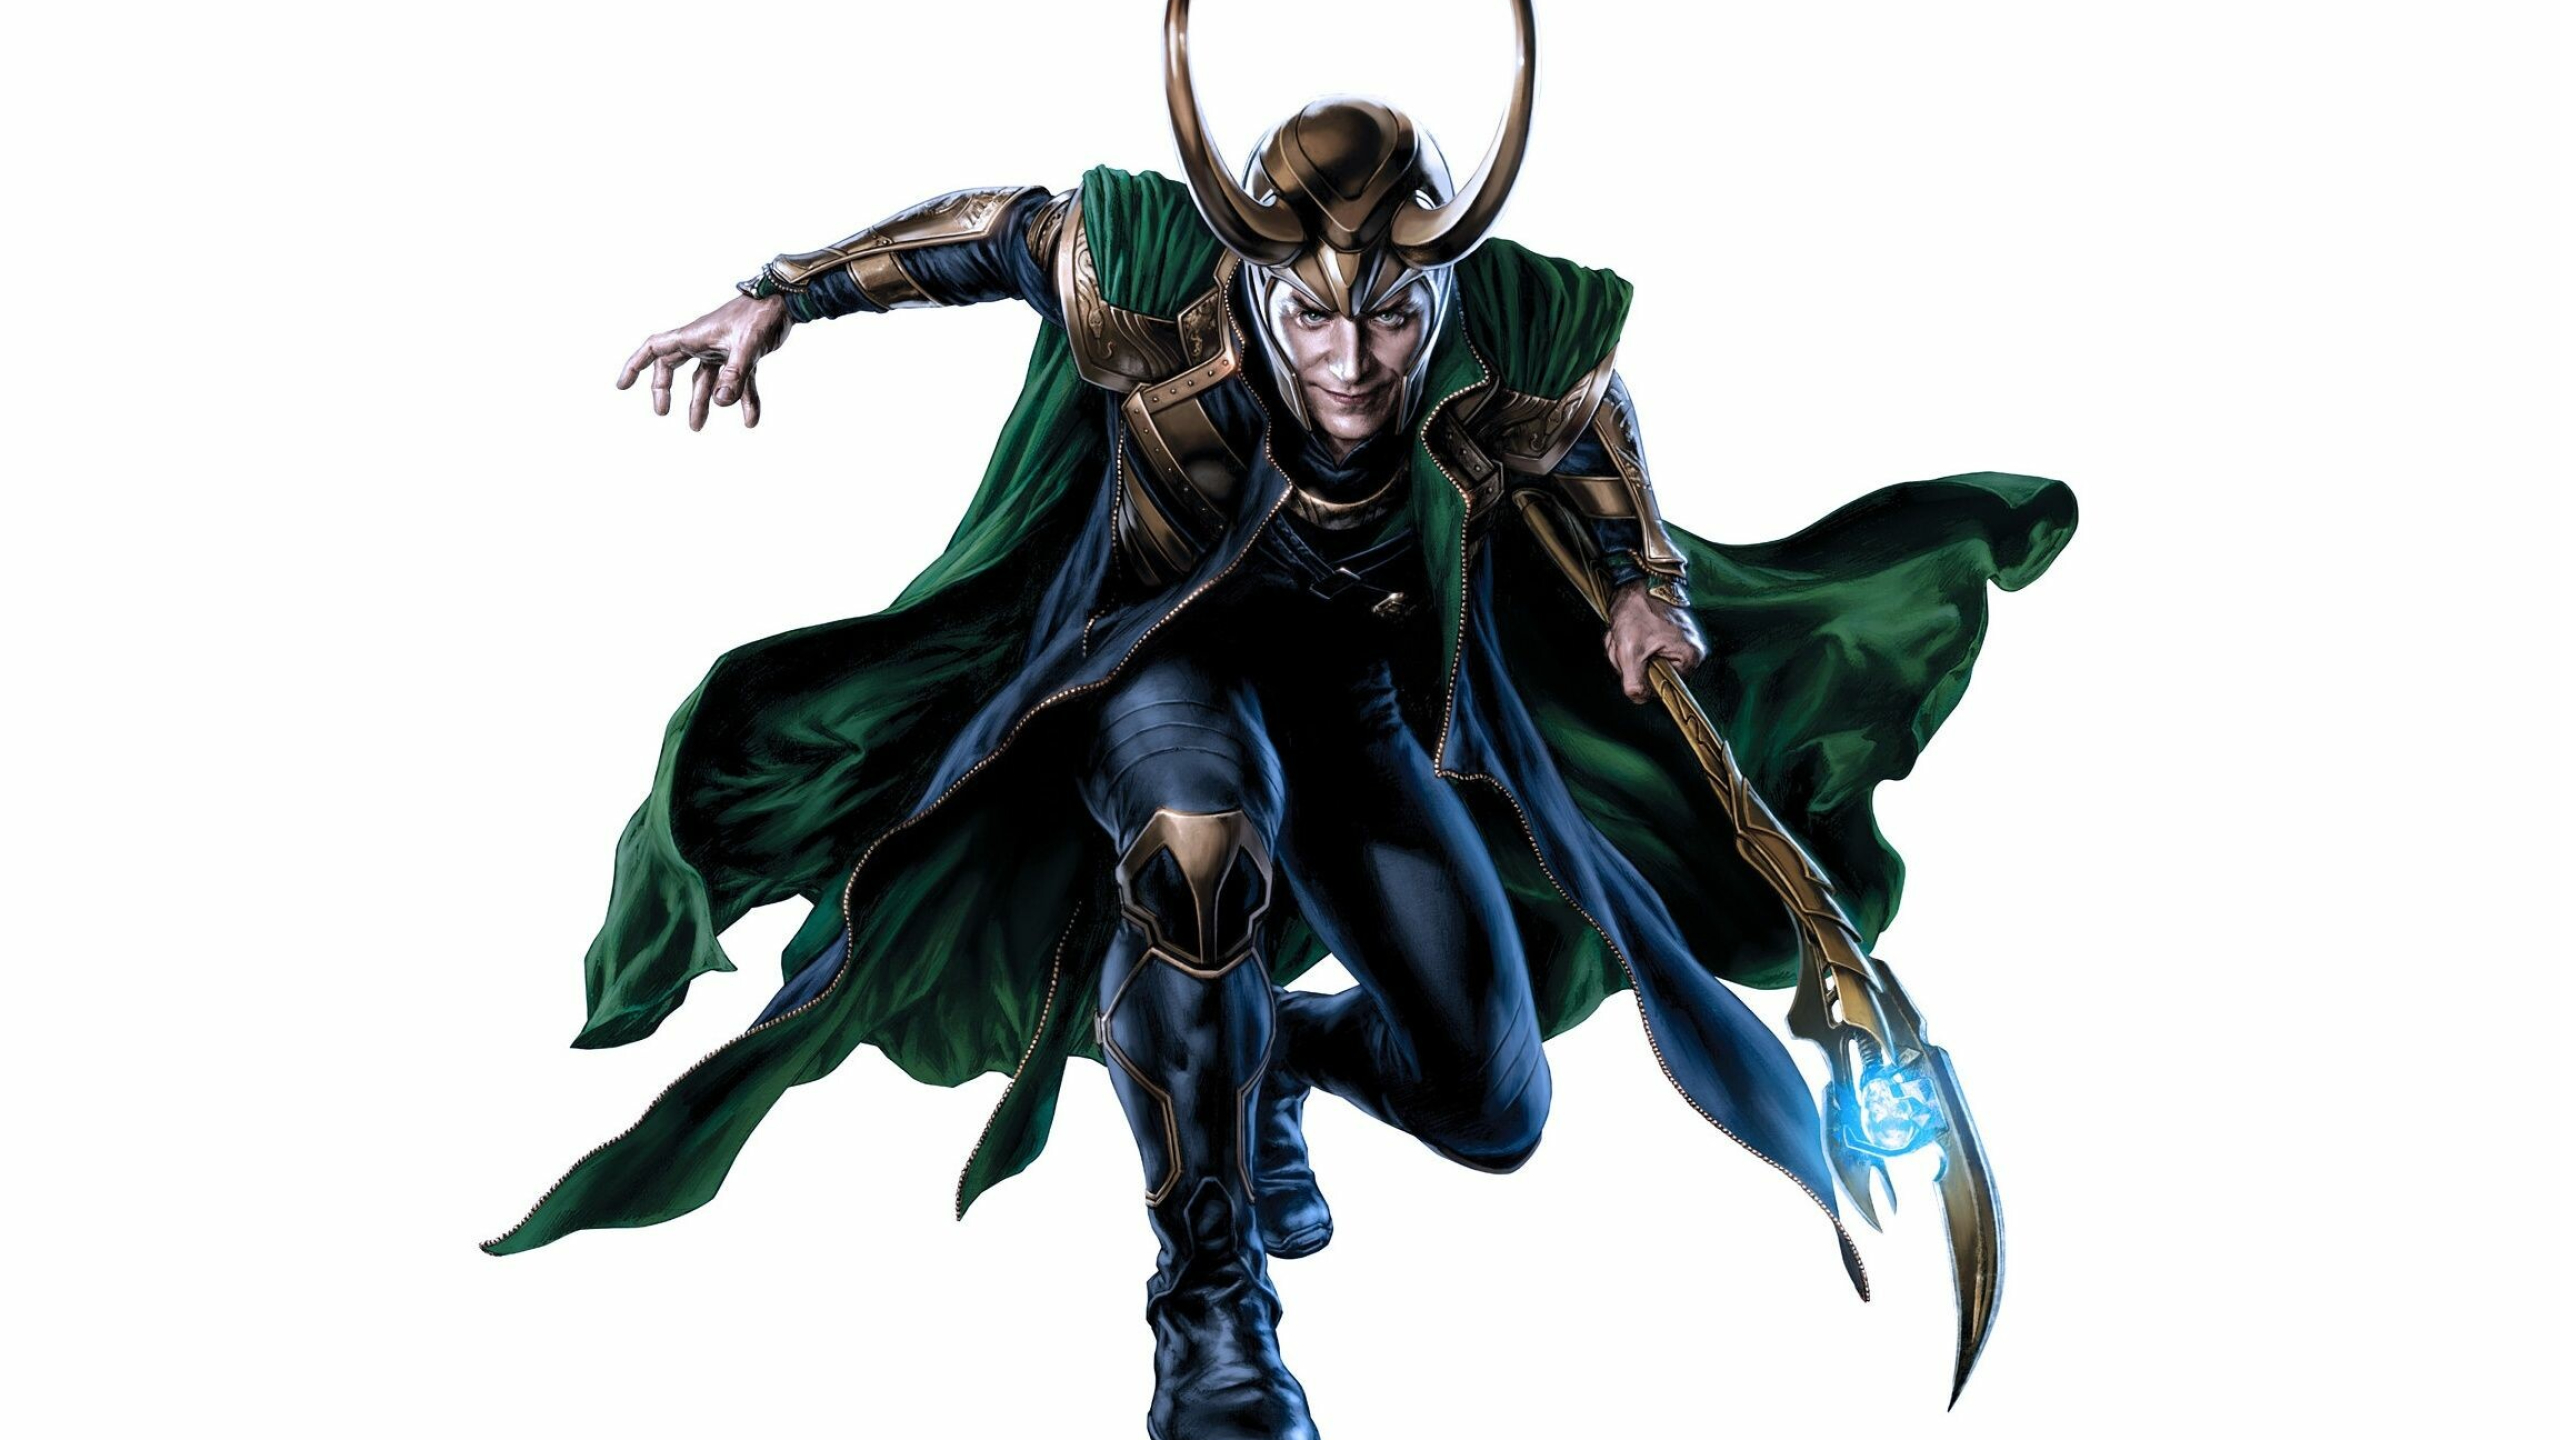 Loki: Made his first Marvel Comics appearance in Timely Comics' publication Venus No. 6. 2560x1440 HD Wallpaper.